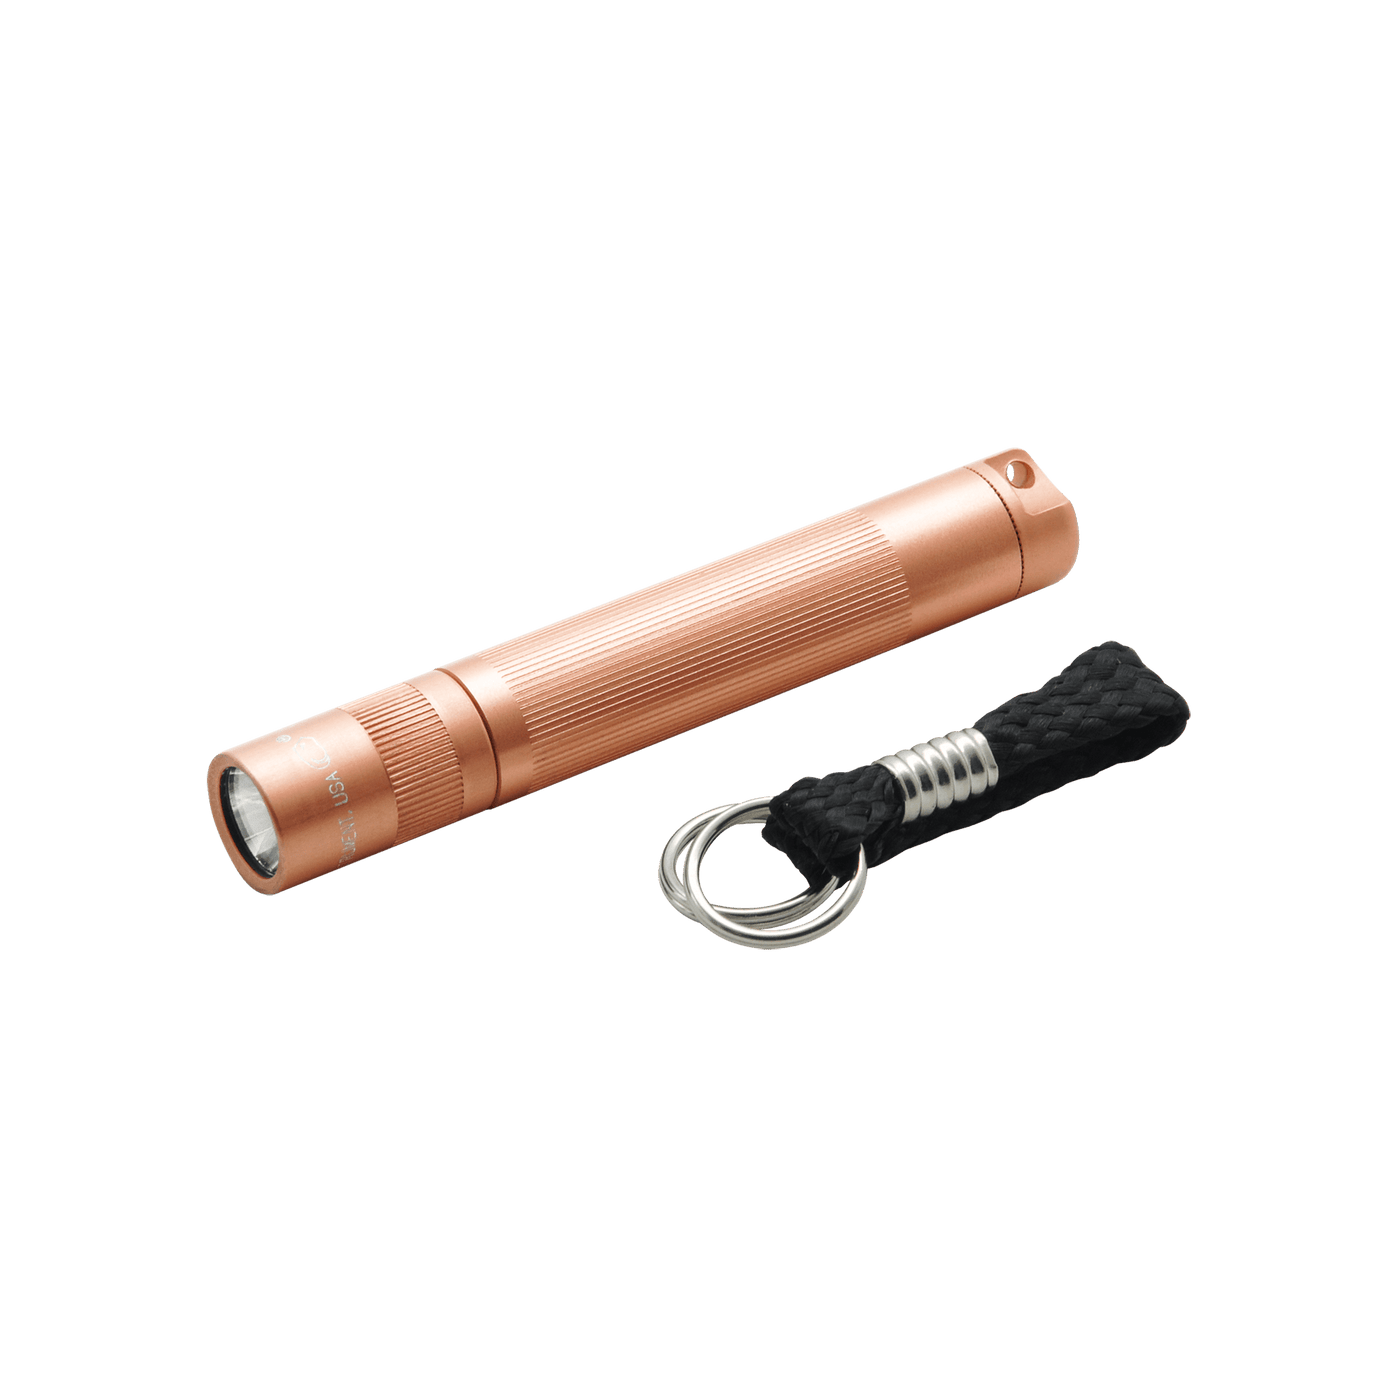 Maglite Solitaire LED Rose Gold Keychain Flashlight